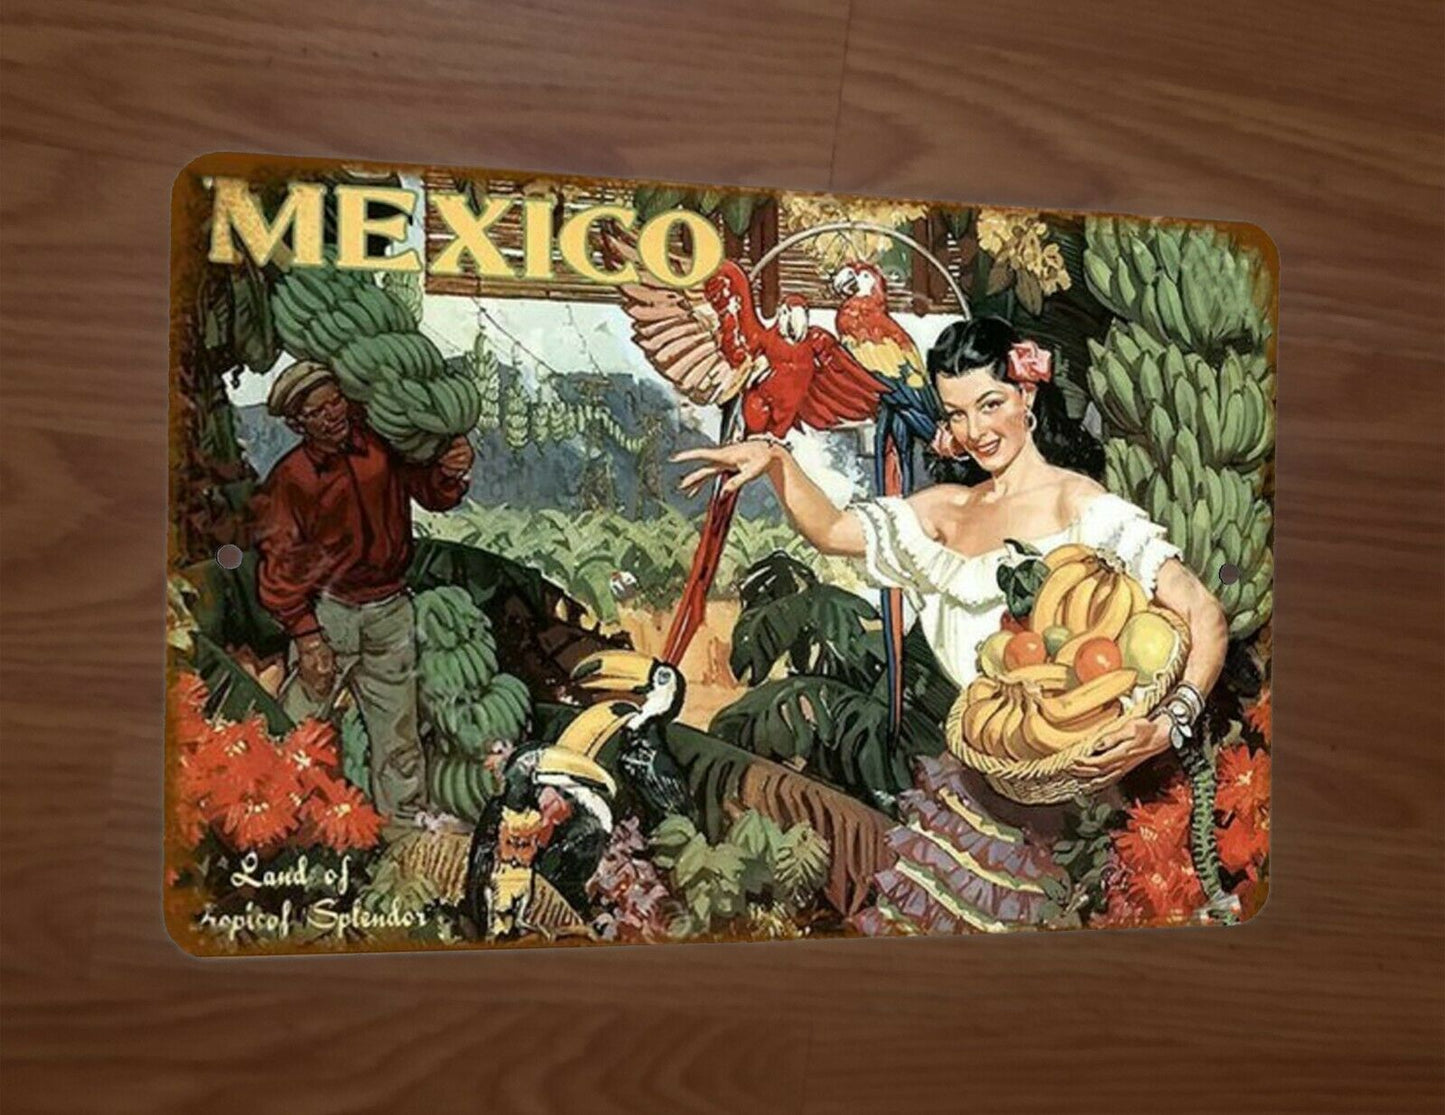 Mexico Land of Tropical Splendor 8x12 Metal Wall Sign Misc Poster